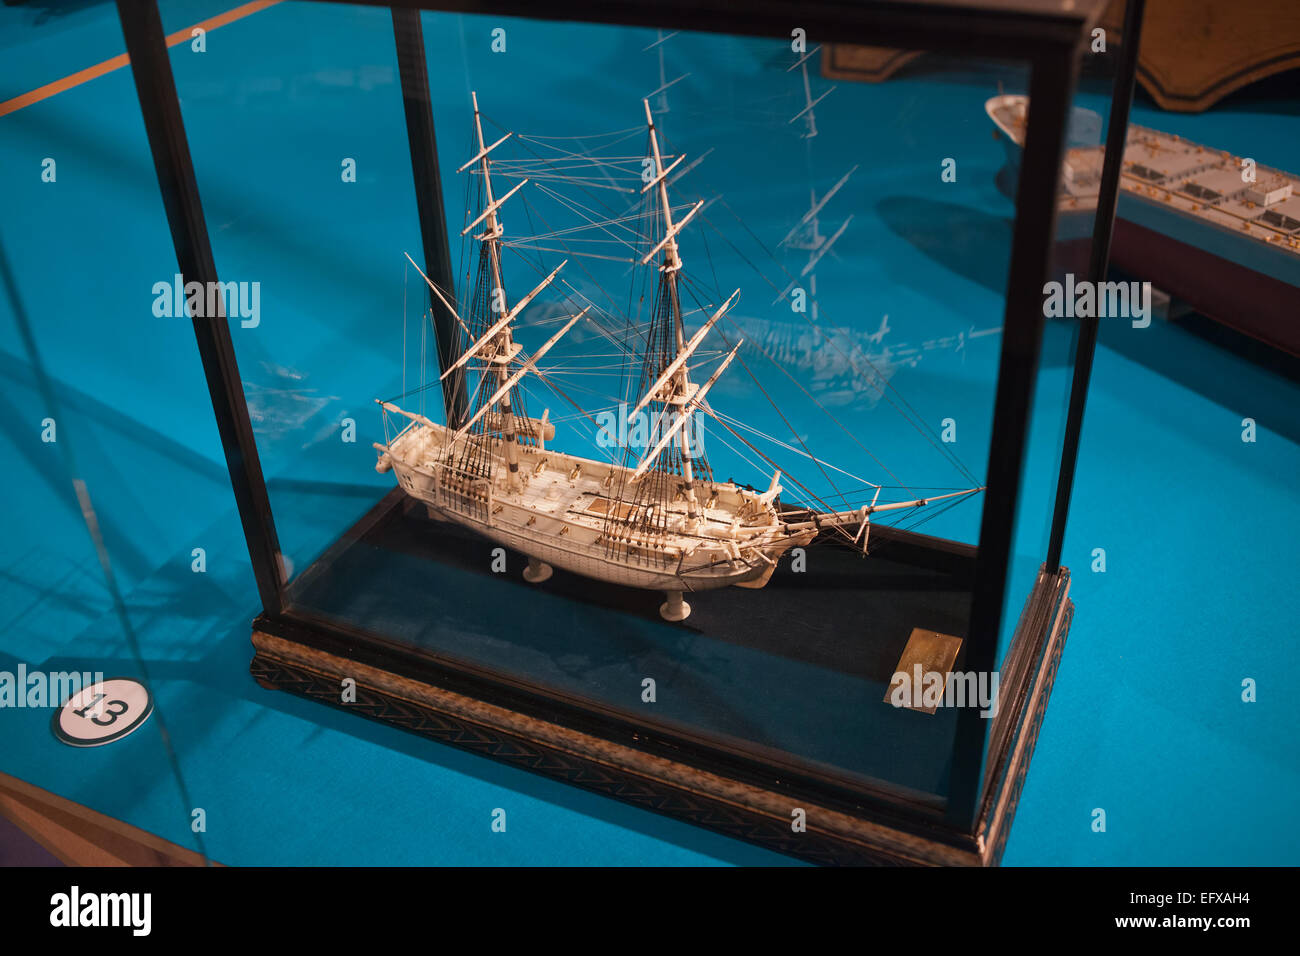 Sailing ship model 'Dolphin' in Rotterdam Maritime Museum, Holland, Netherlands. Stock Photo